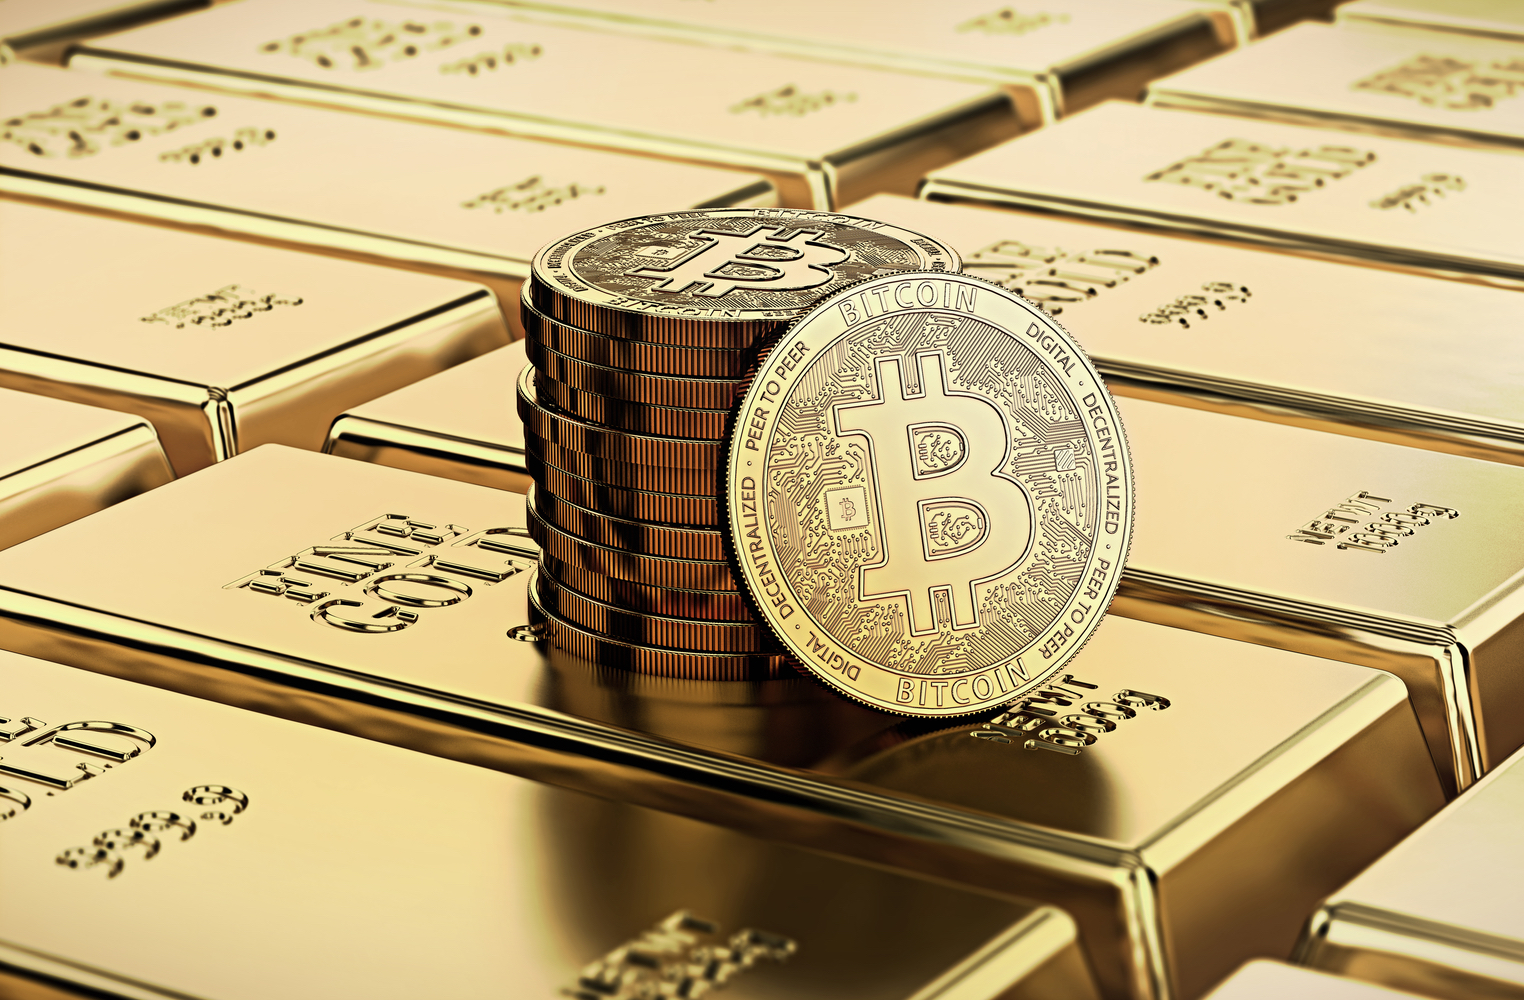 When Bitcoin Overtakes Gold - How High Can It Go? | Markets and Prices Bitcoin News